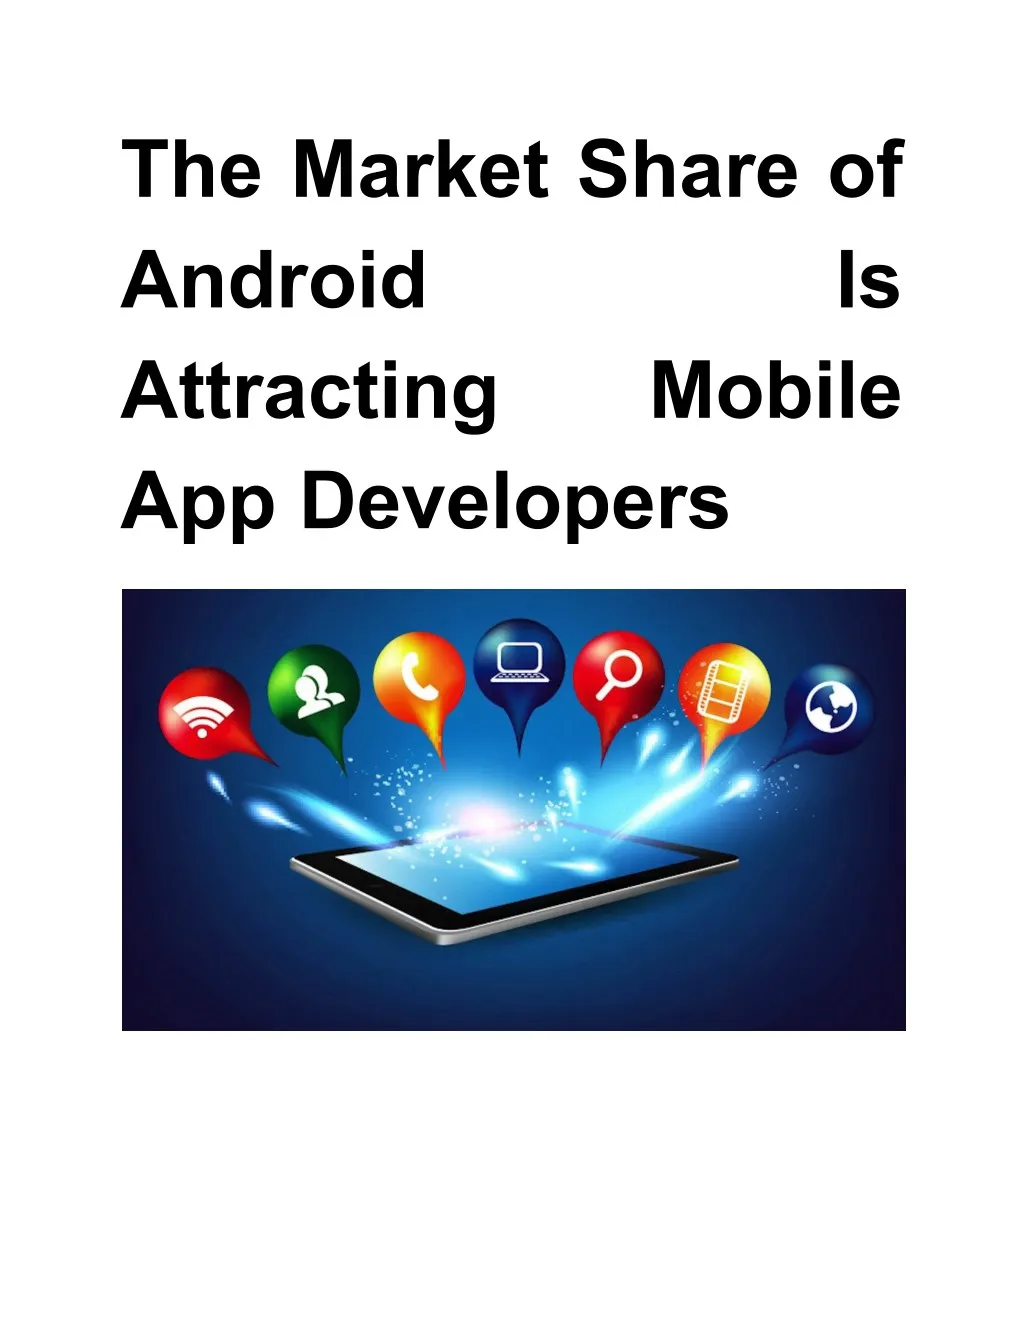 the market share of android attracting